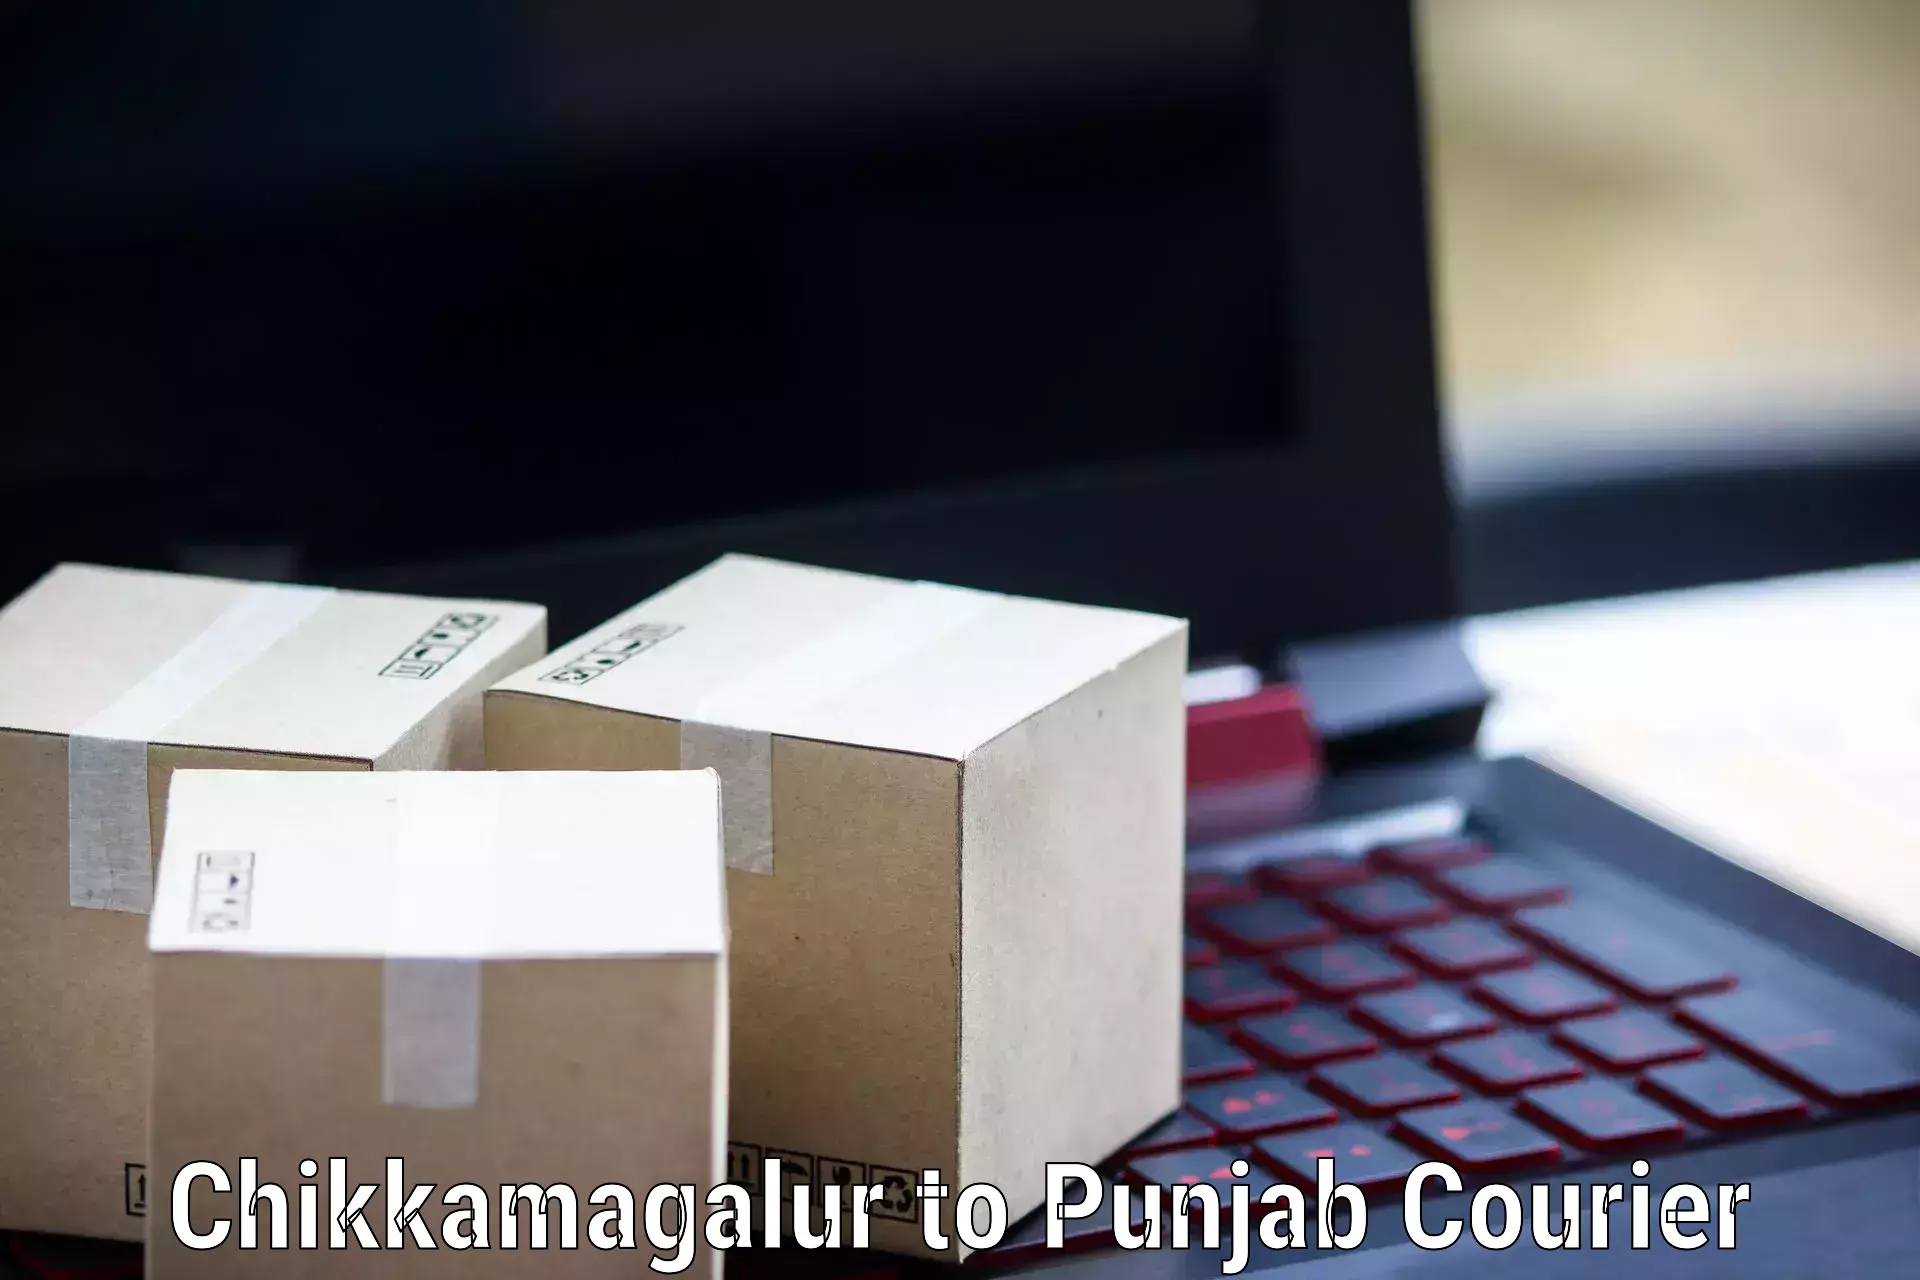 Online shipping calculator Chikkamagalur to Patiala